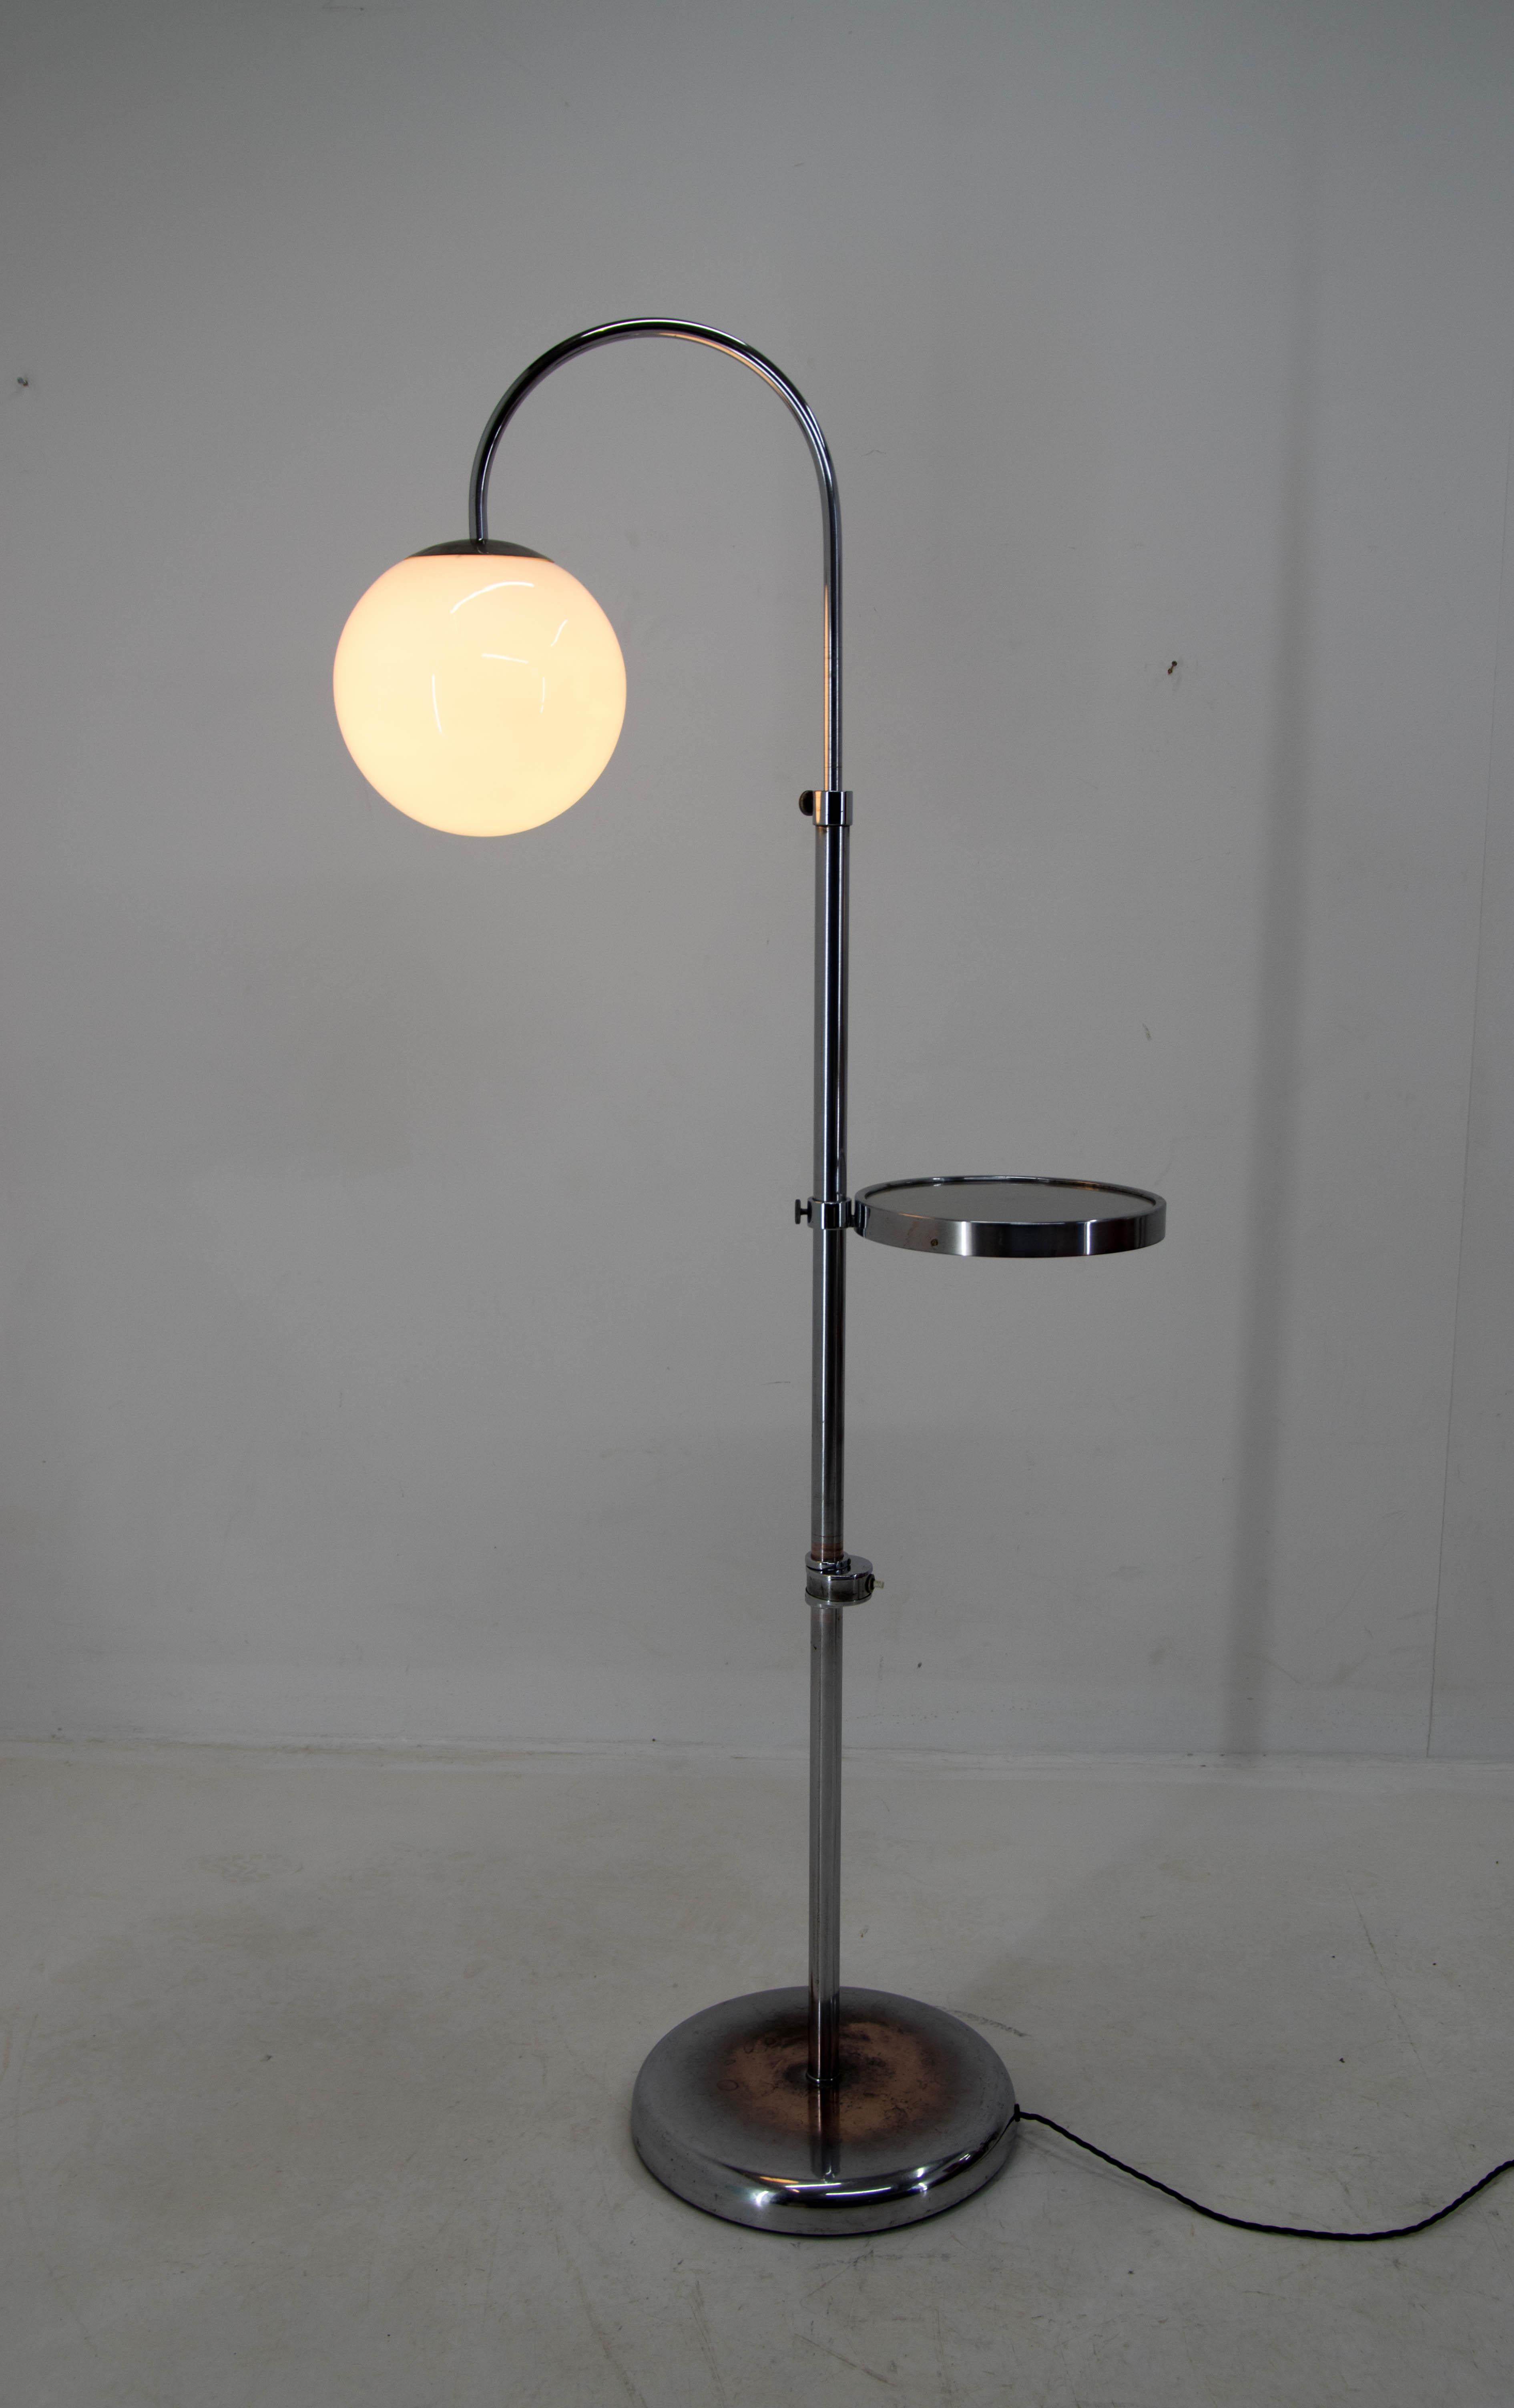 Mid-20th Century Bauhaus or Functionalist Floor Lamp with Adjustable Height, 1940s